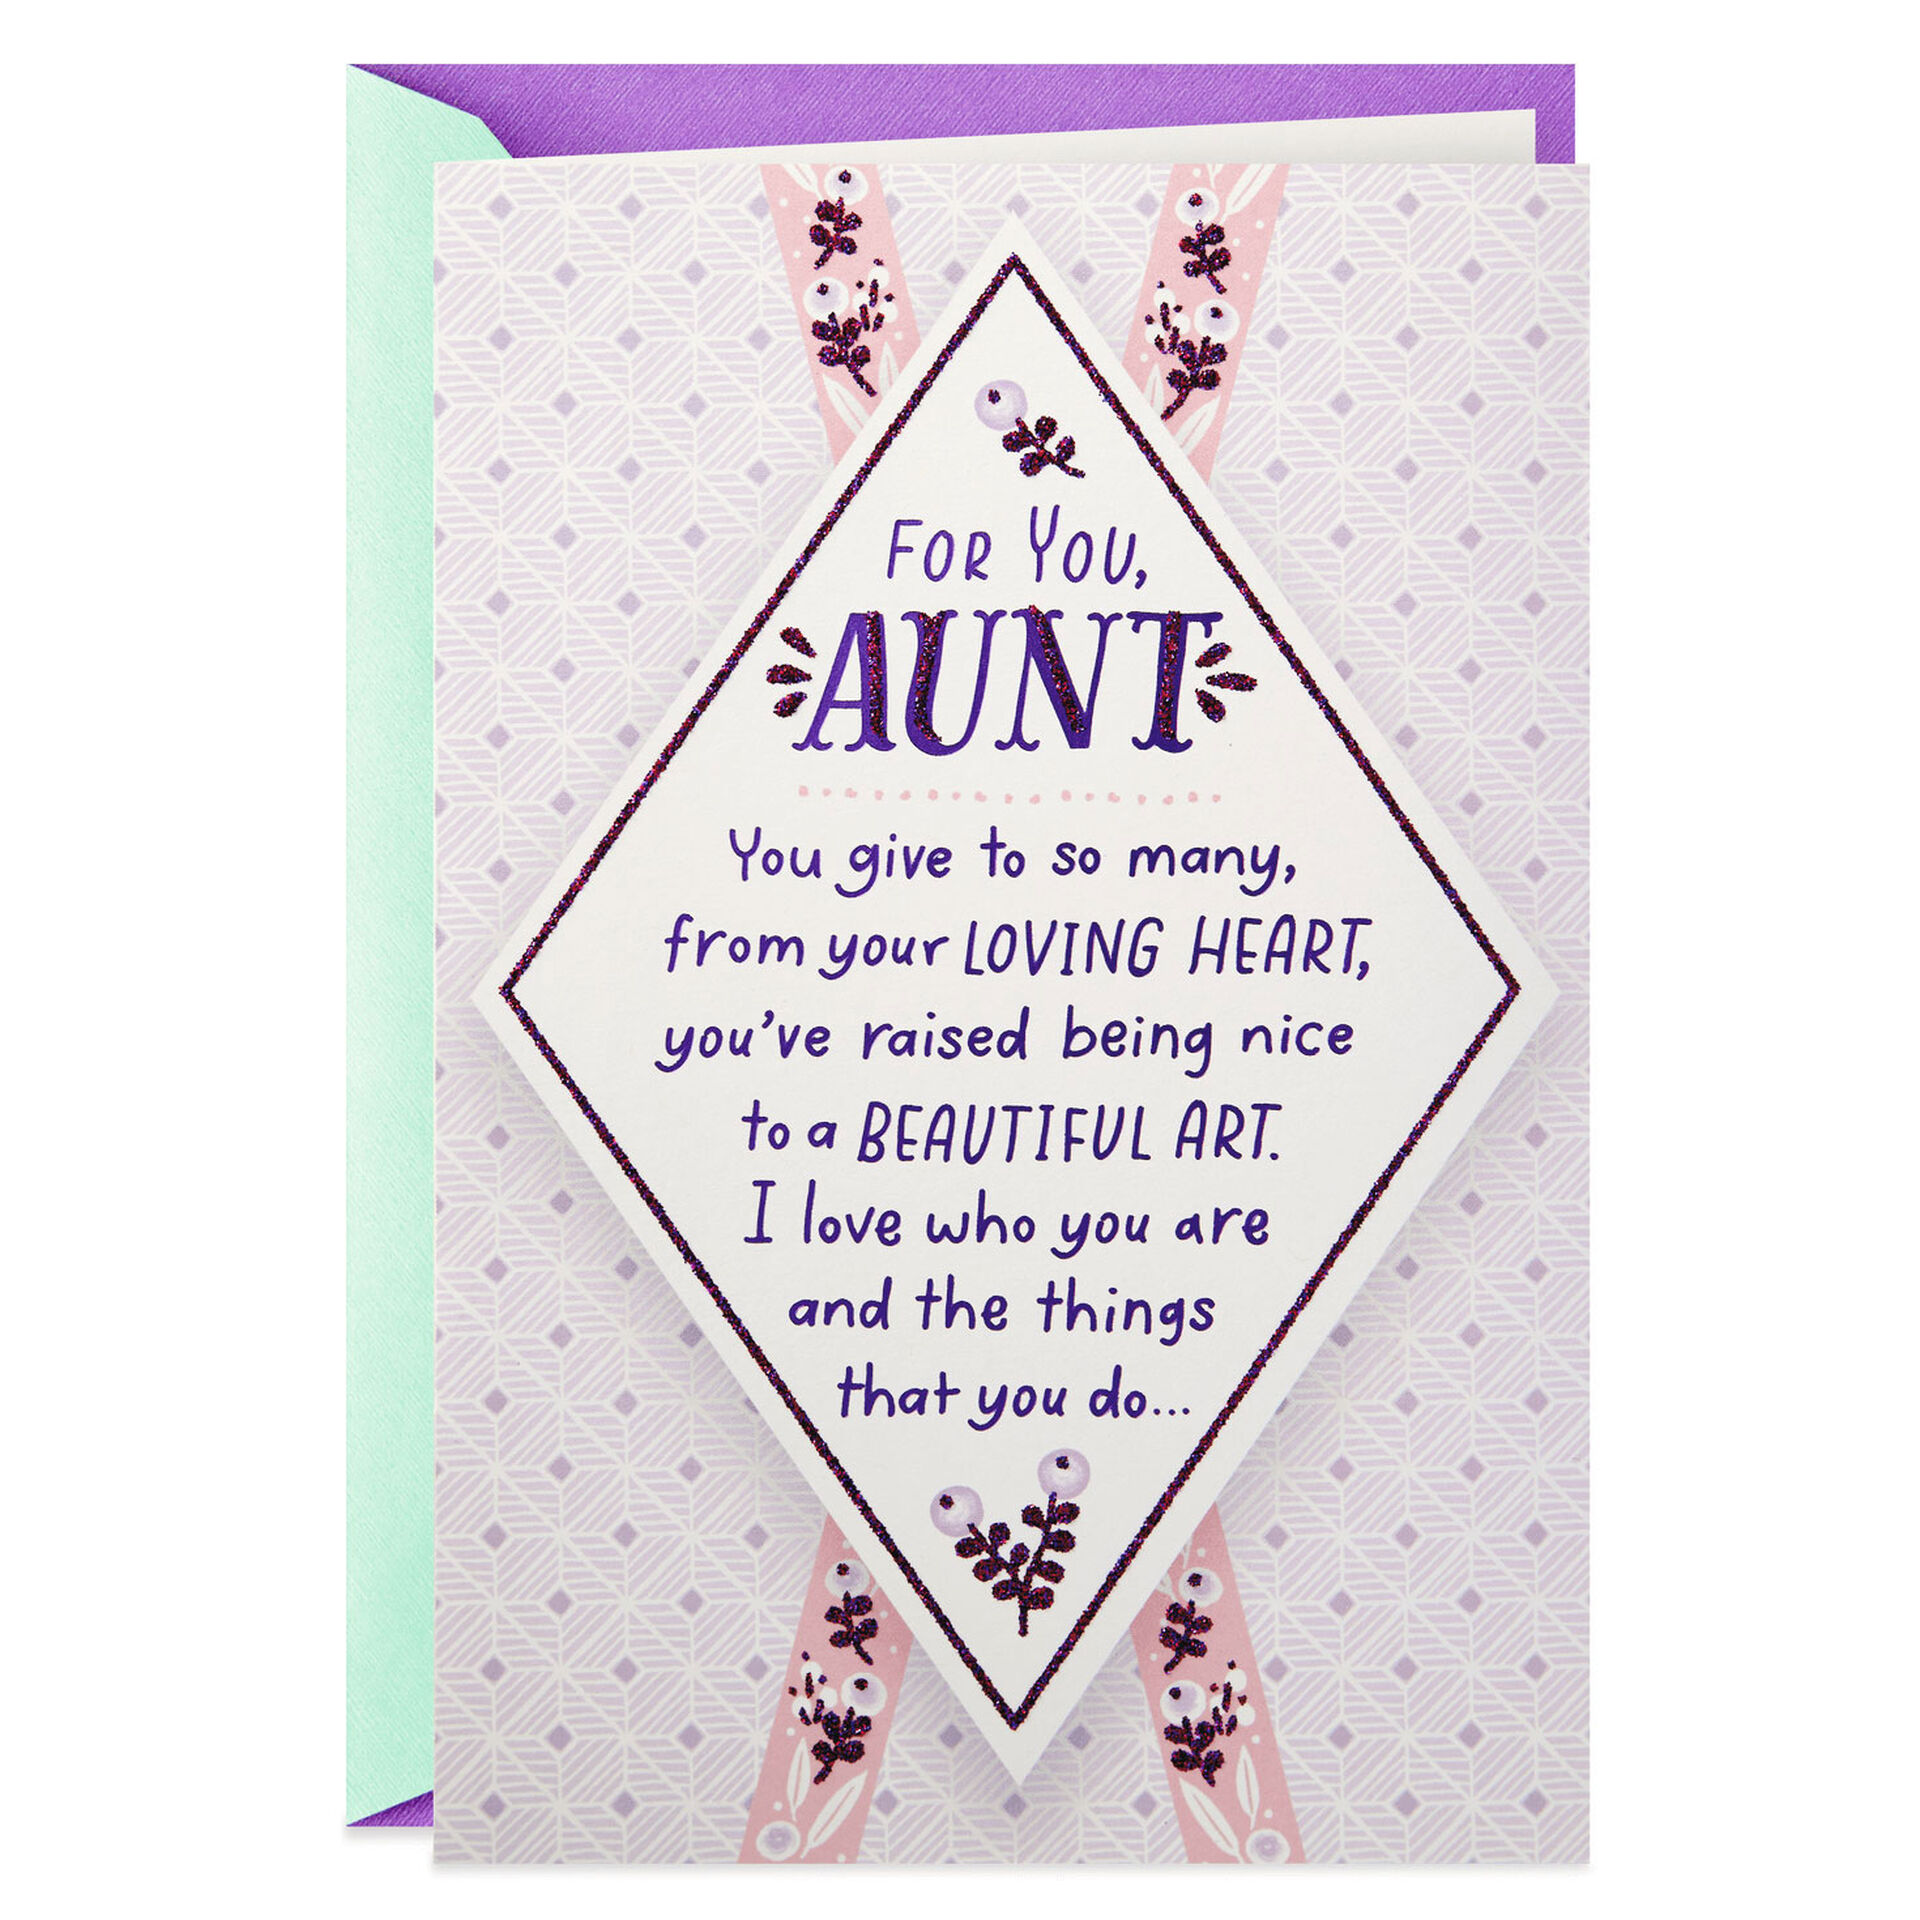 Your Loving Heart Mother's Day Card for Aunt - Greeting Cards - Hallmark